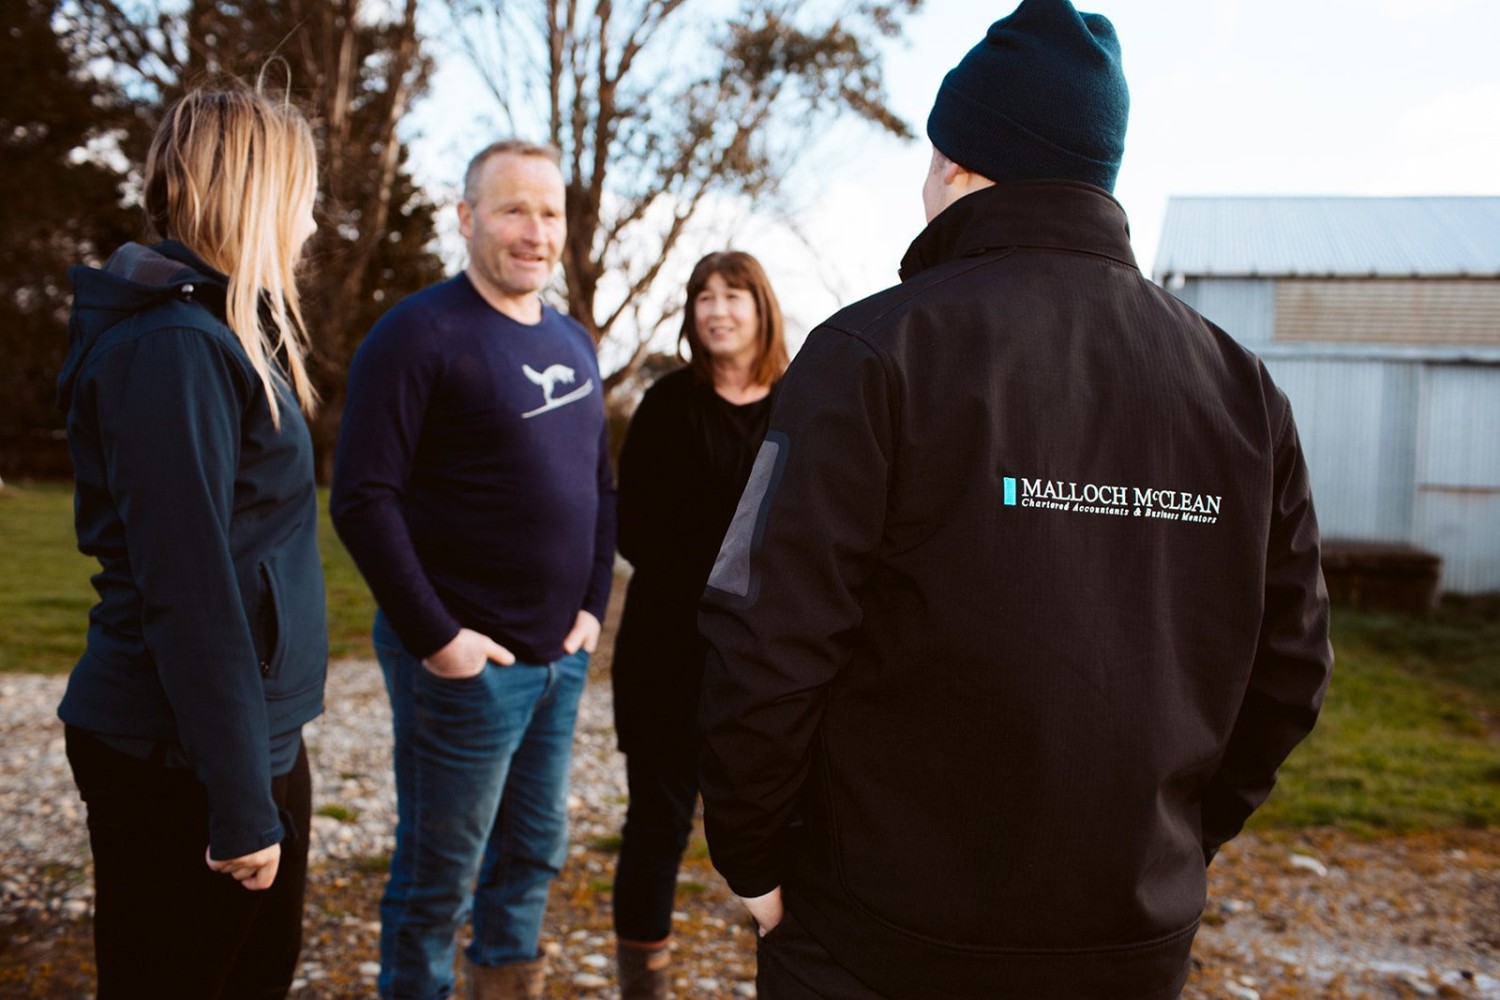 Malloch McClean team members having a meeting with a client, discussing how we can help them make more money, pay less tax and get ahead faster.